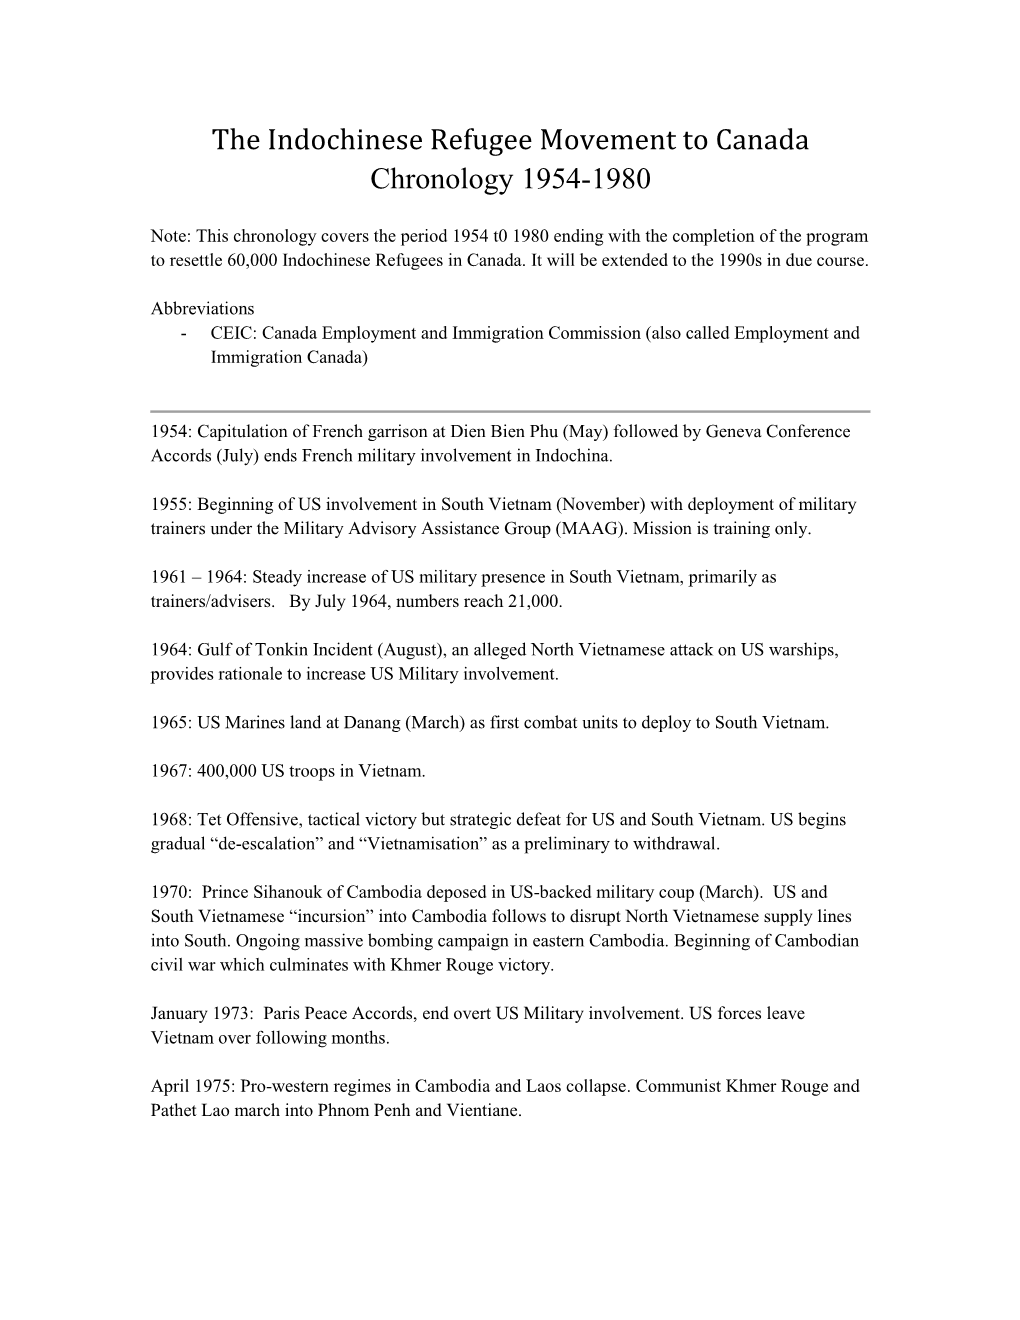 The Indochinese Refugee Movement to Canada Chronology 1954-1980